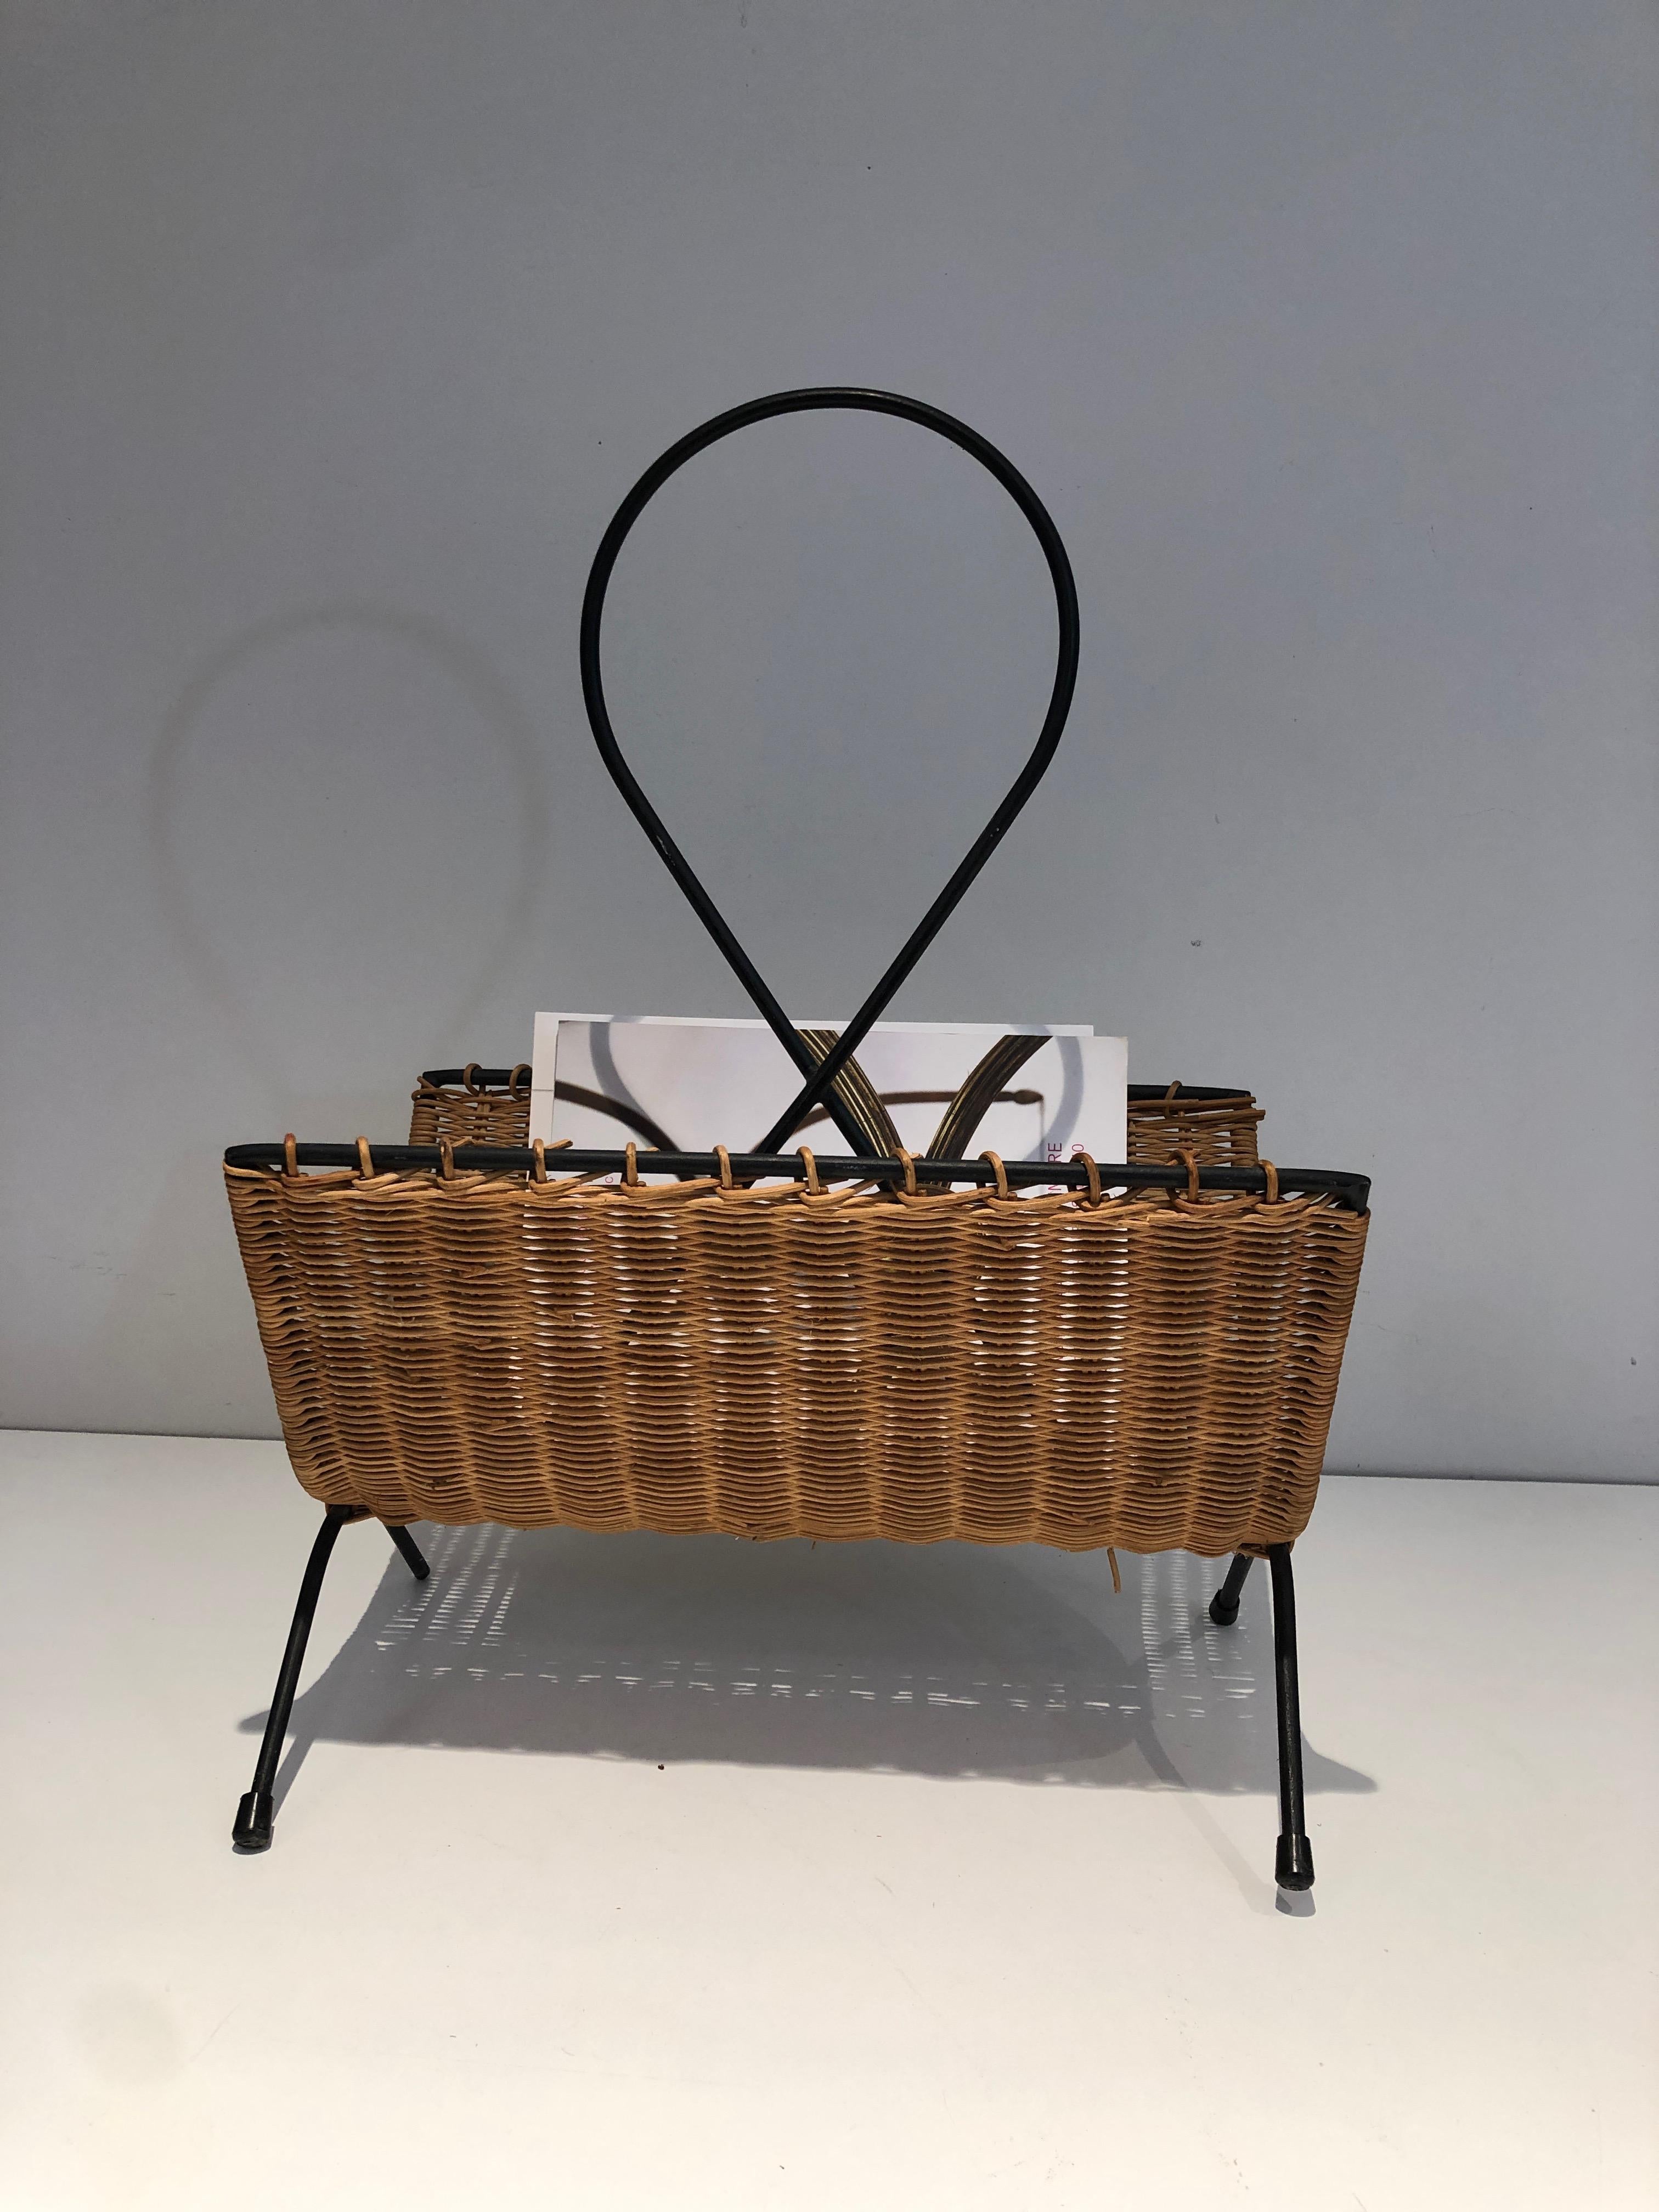 Black Lacquered Metal Magazine Rack, French Work, Circa 1950 For Sale 7